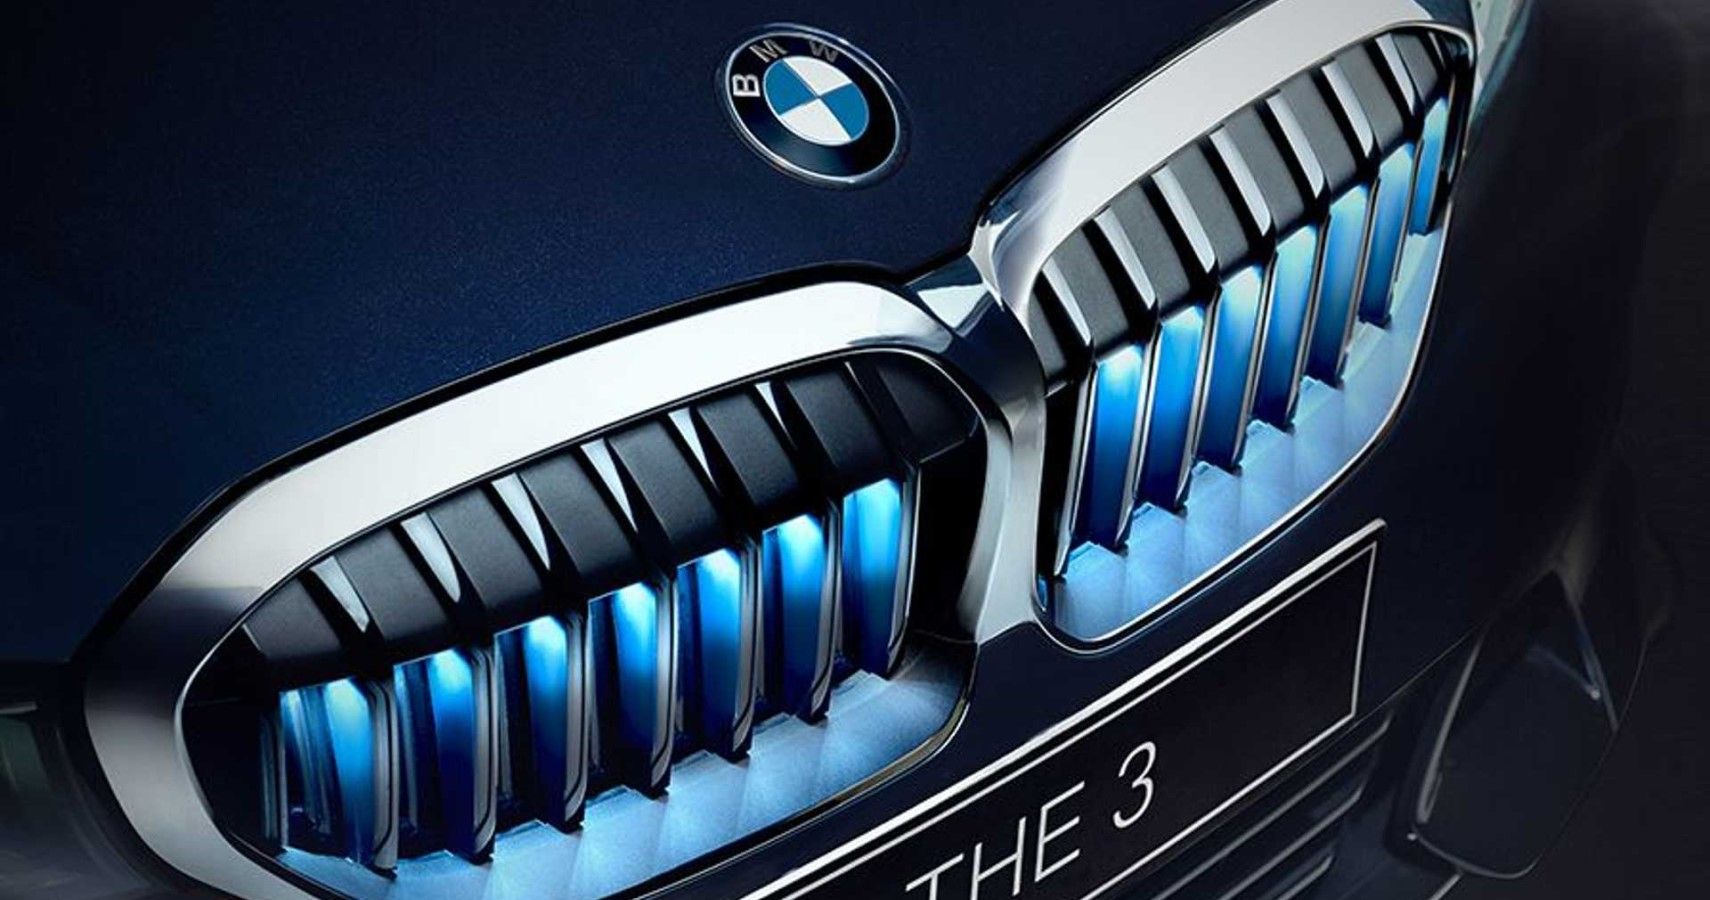 BMW 3-Series Gran Limousine Iconic Edition illuminated kidney grille close-up view